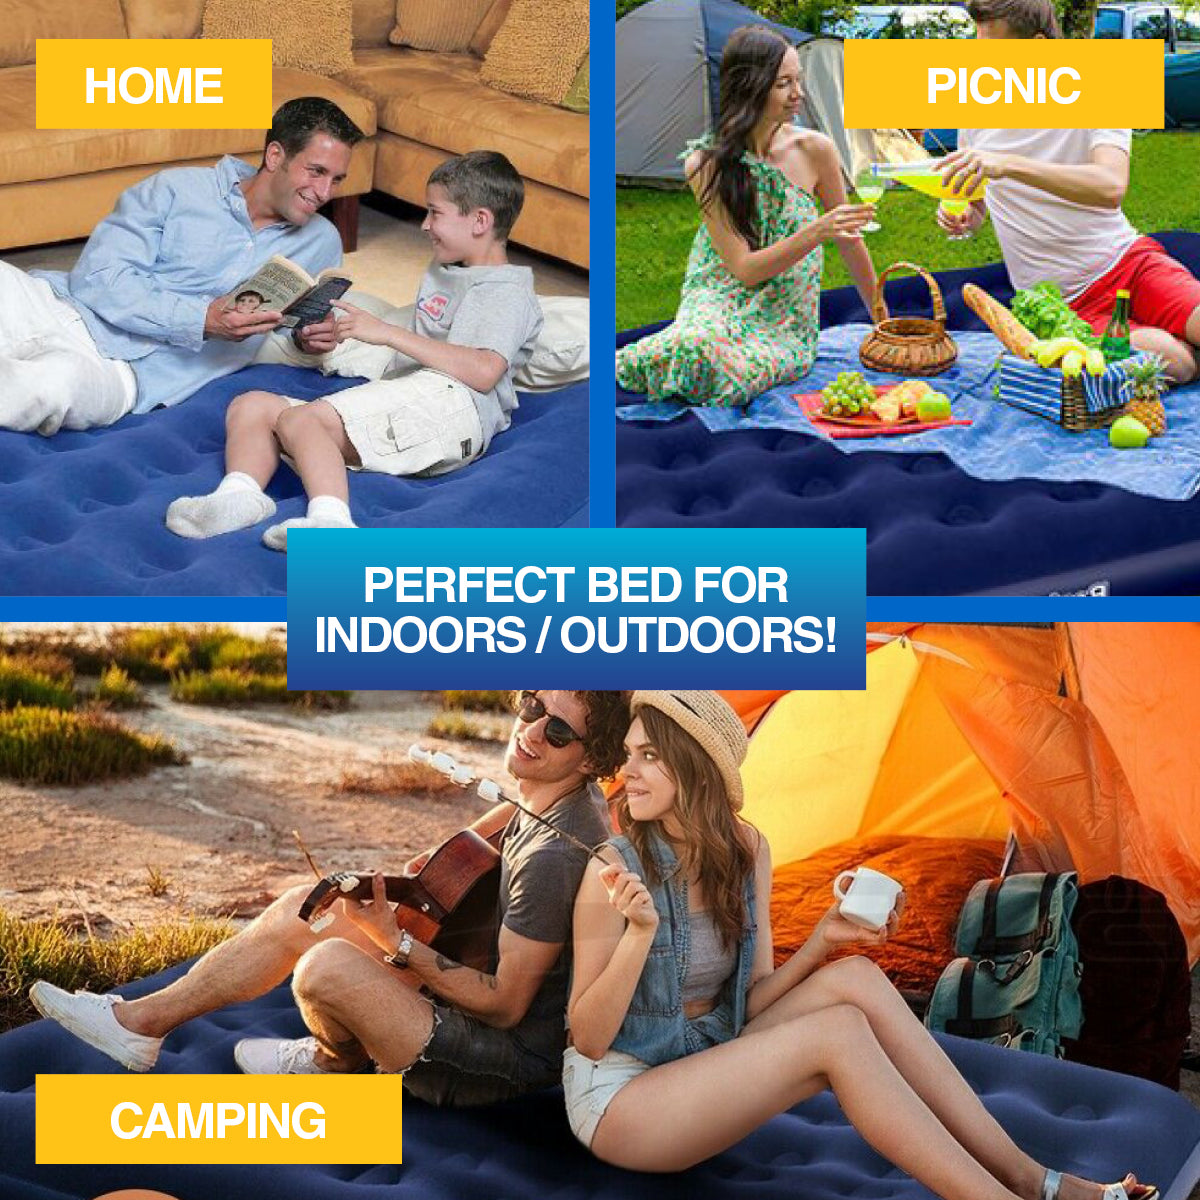 Bestway Double Inflatable Air Bed Indoor/Outdoor Heavy Duty Durable Camping - SILBERSHELL